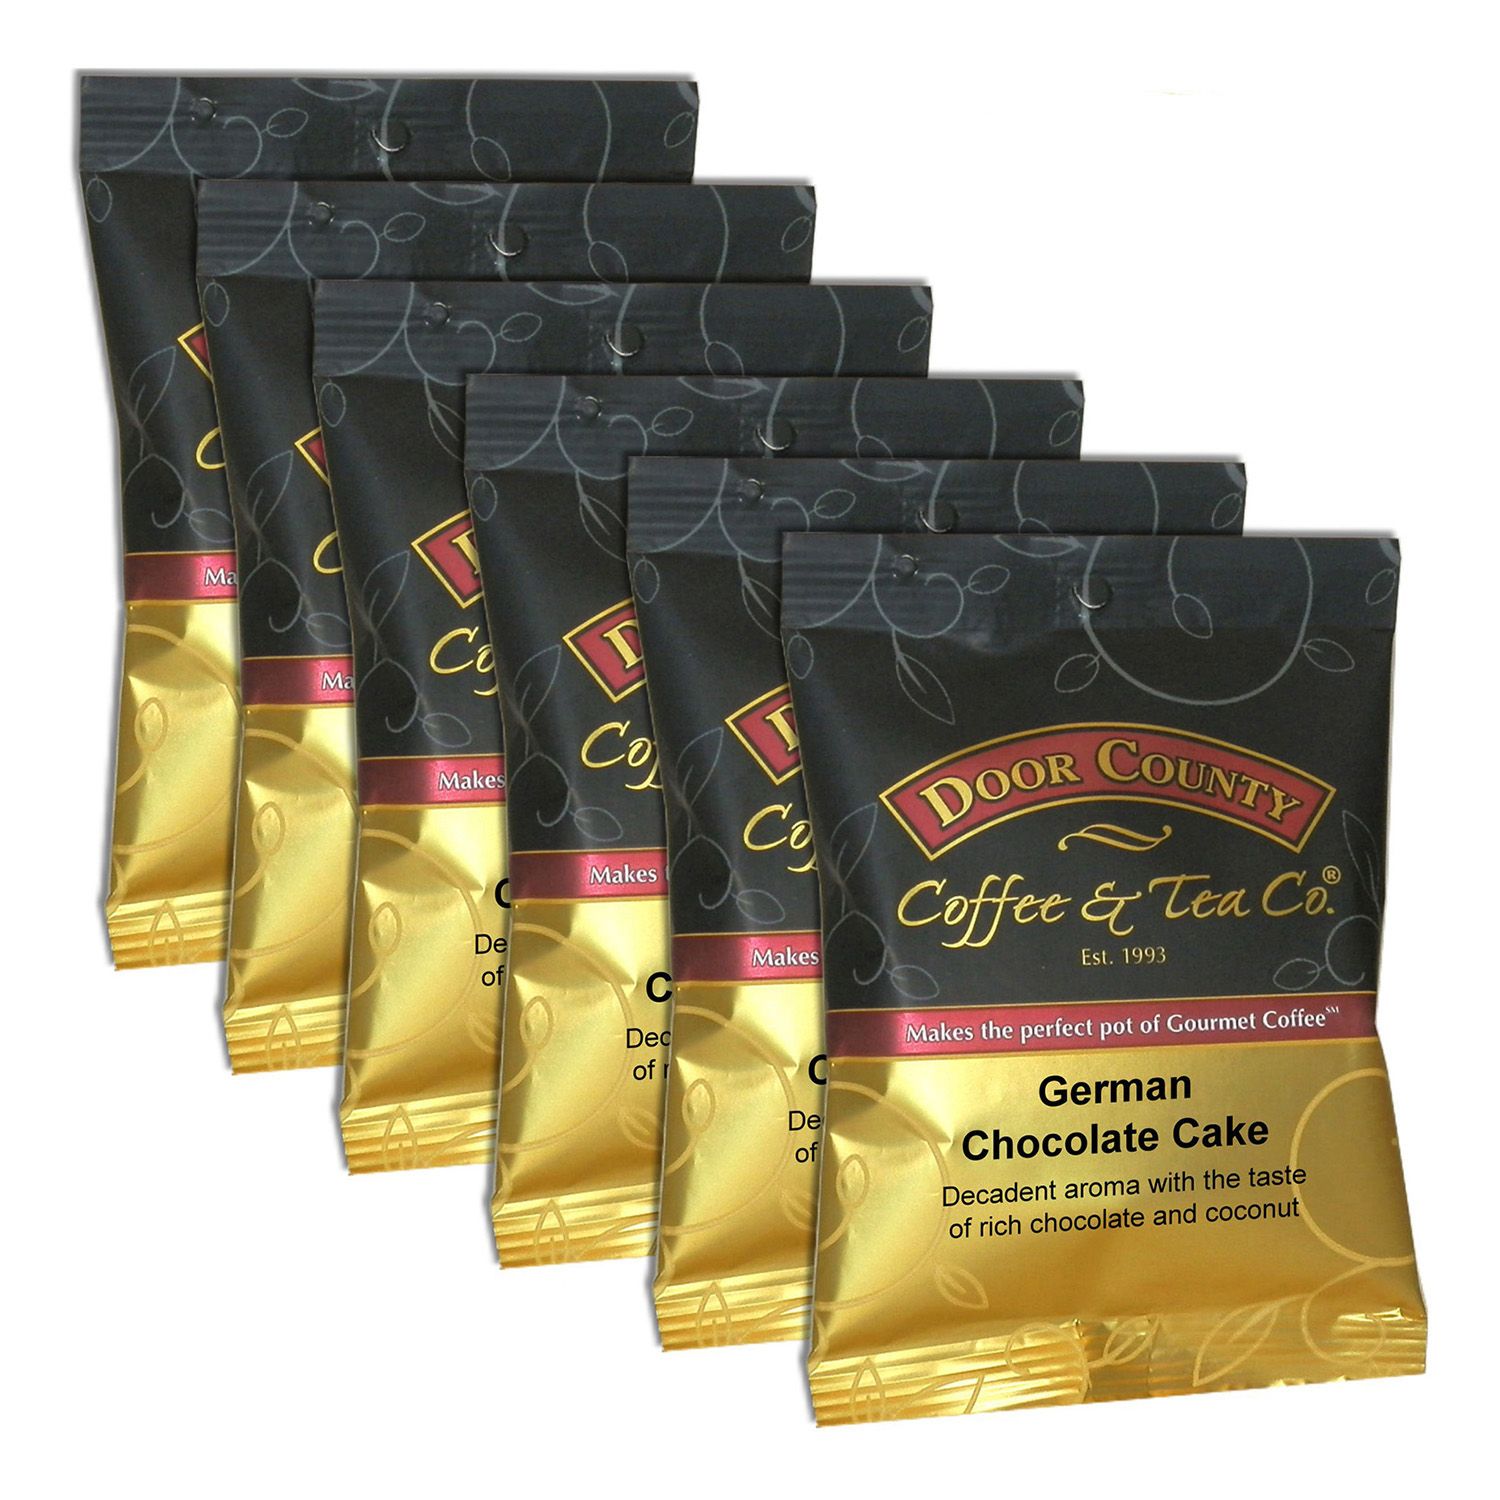 Image for Door County Coffee German Chocolate Cake Ground Coffee 6-pk. at Kohl's.